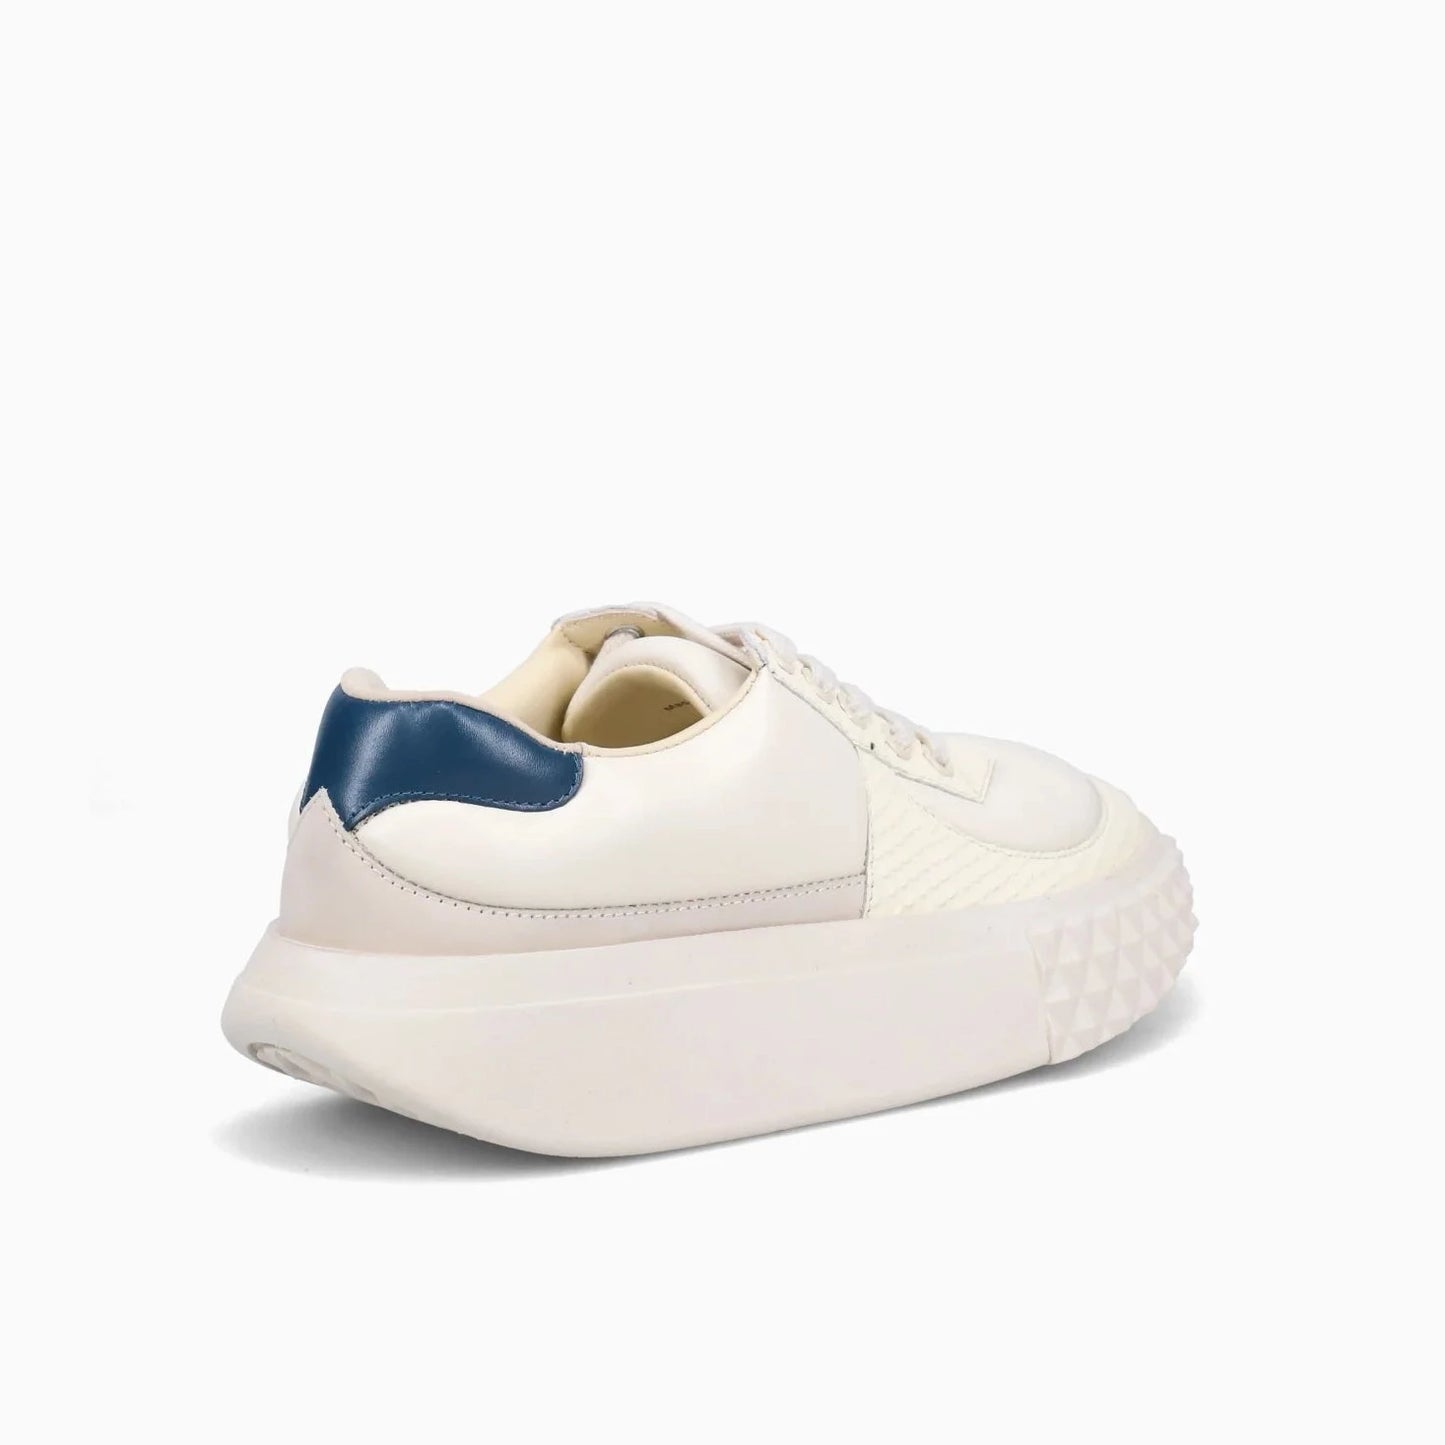 4CCCCEES | WOMEN'S SNEAKERS | BILLOW SUN IVORY | WHITE